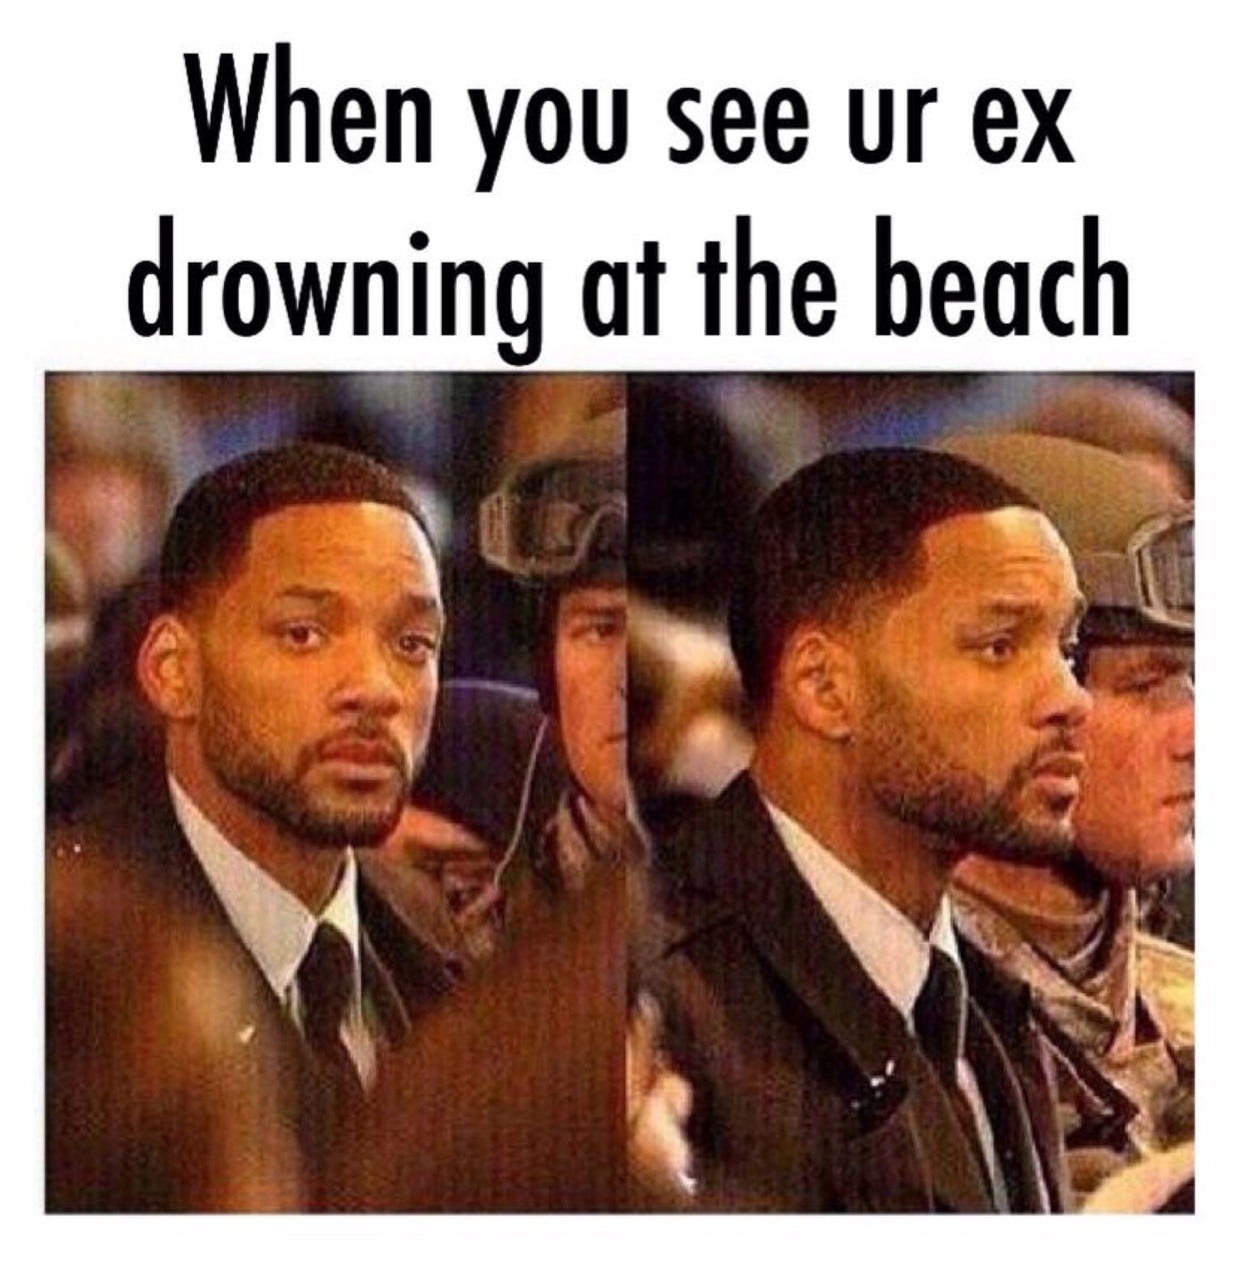 someone waves at me on messenger - When you see ur ex drowning at the beach